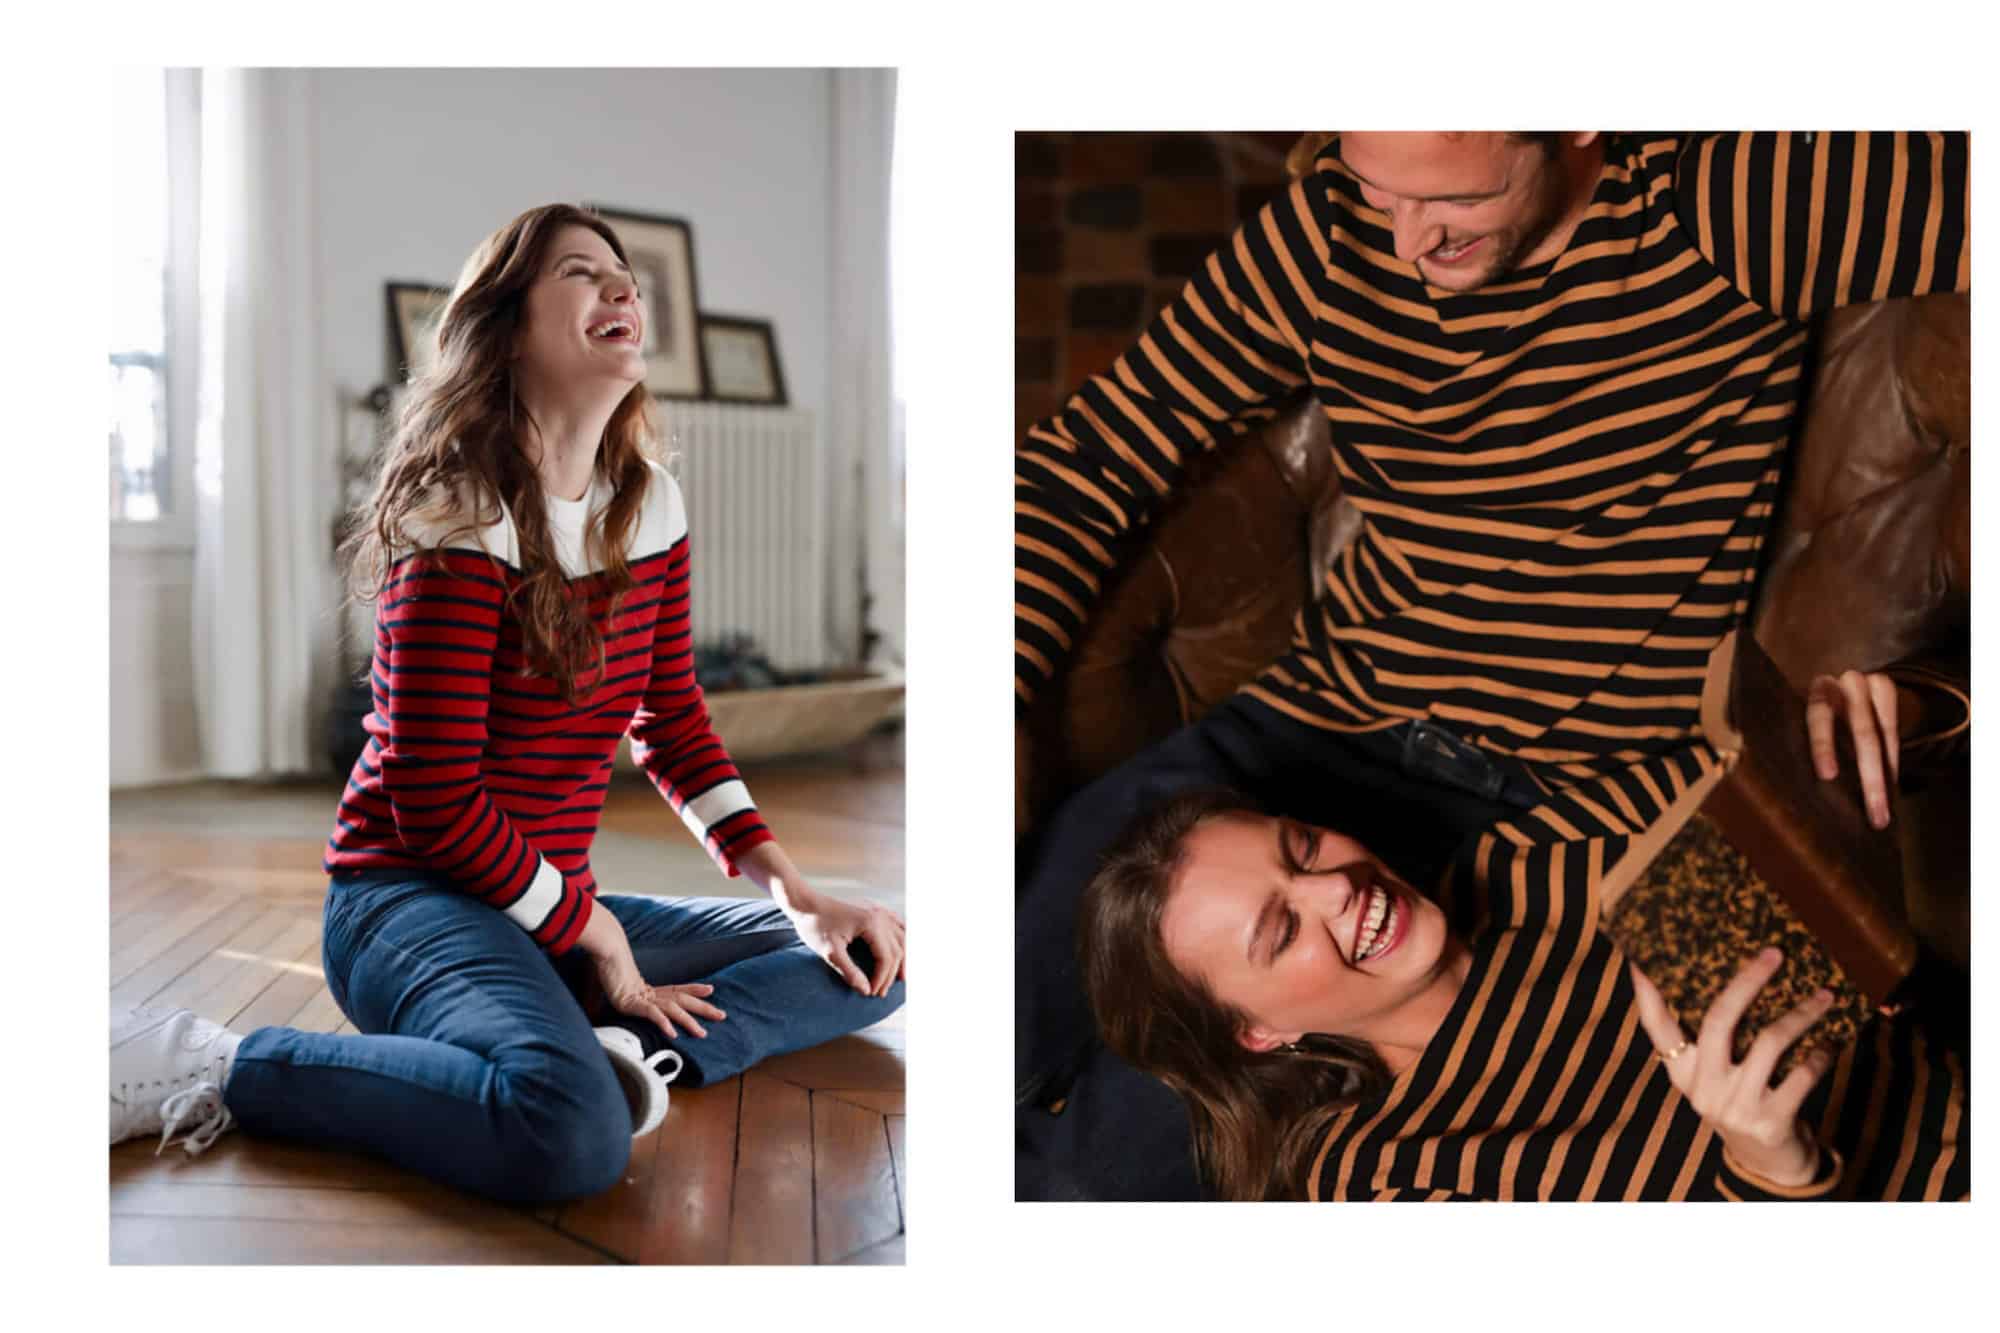 Left: a woman with long black hair sits smiling on a parquet floor in a Paris apartment, wearing white sneakers, jeans, and a red and dark blue striped sweater with a white band across the shoulders and collar. Right: a smiling man sits on a brown leather sofa with a woman resting her head in his lap, also smiling. They ar eboth wearing matching black and tan striped tops from Saint James.